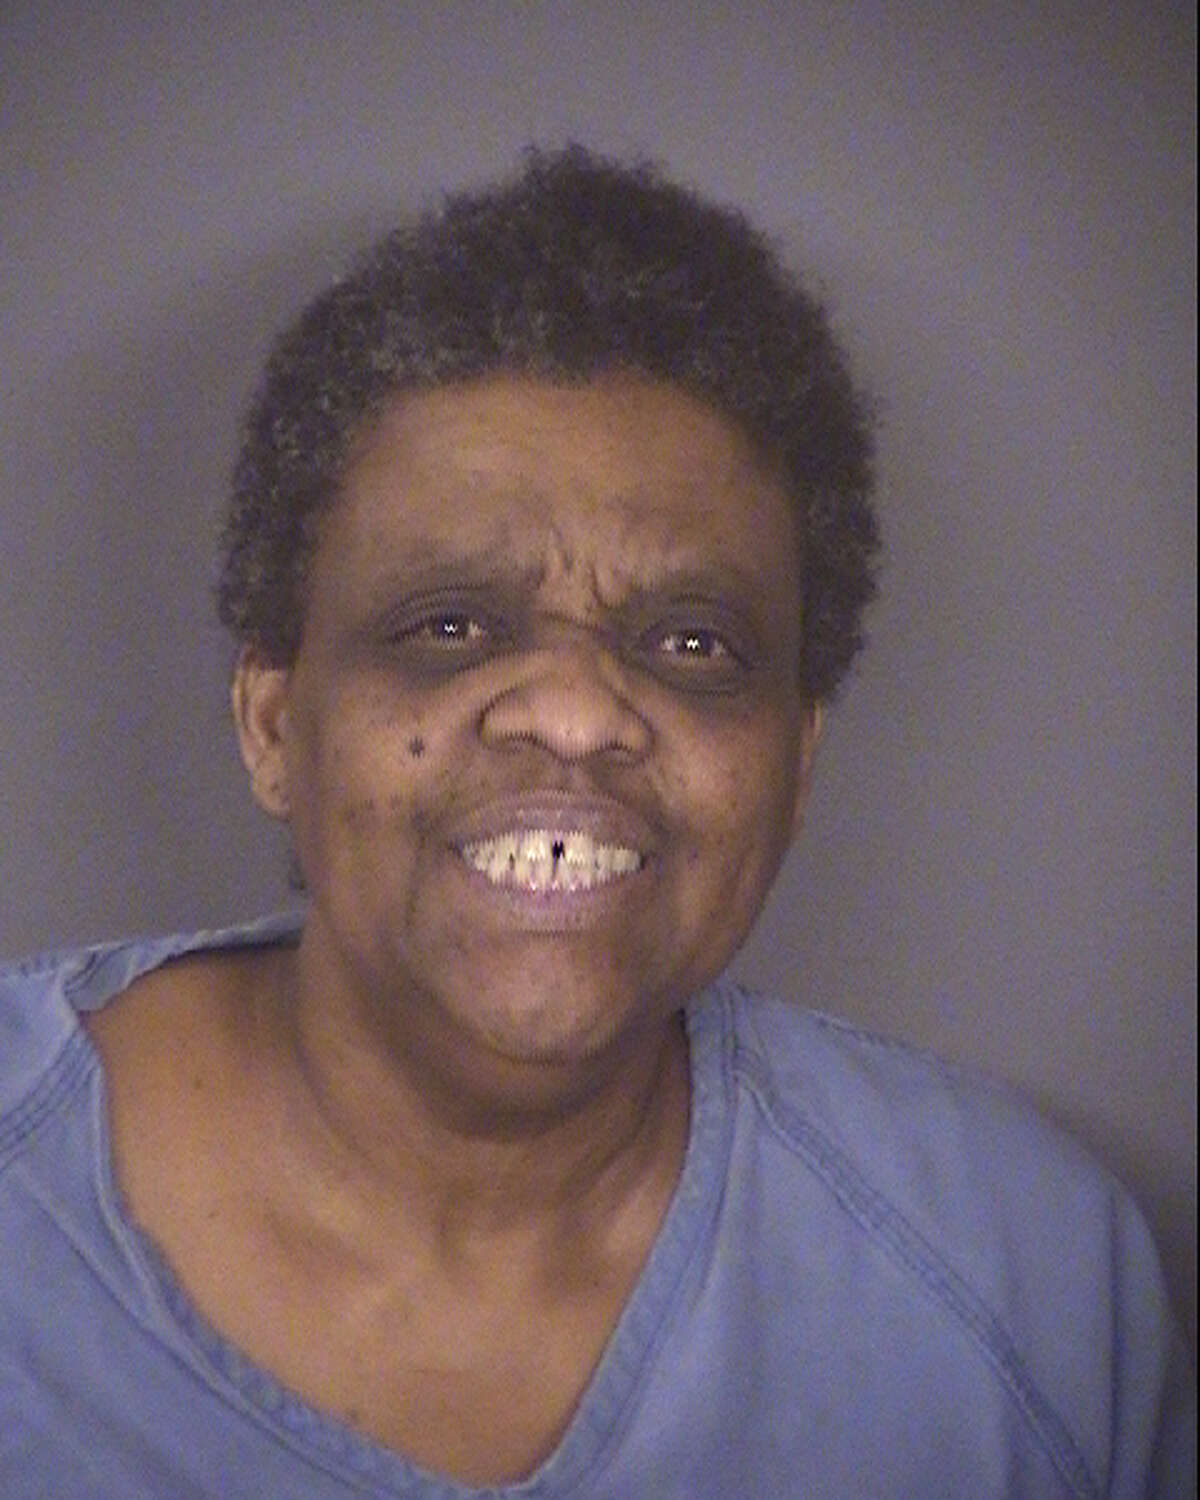 Janice Karen Dotson, 61, was identified as the woman who died Friday at the Bexar County Jail.